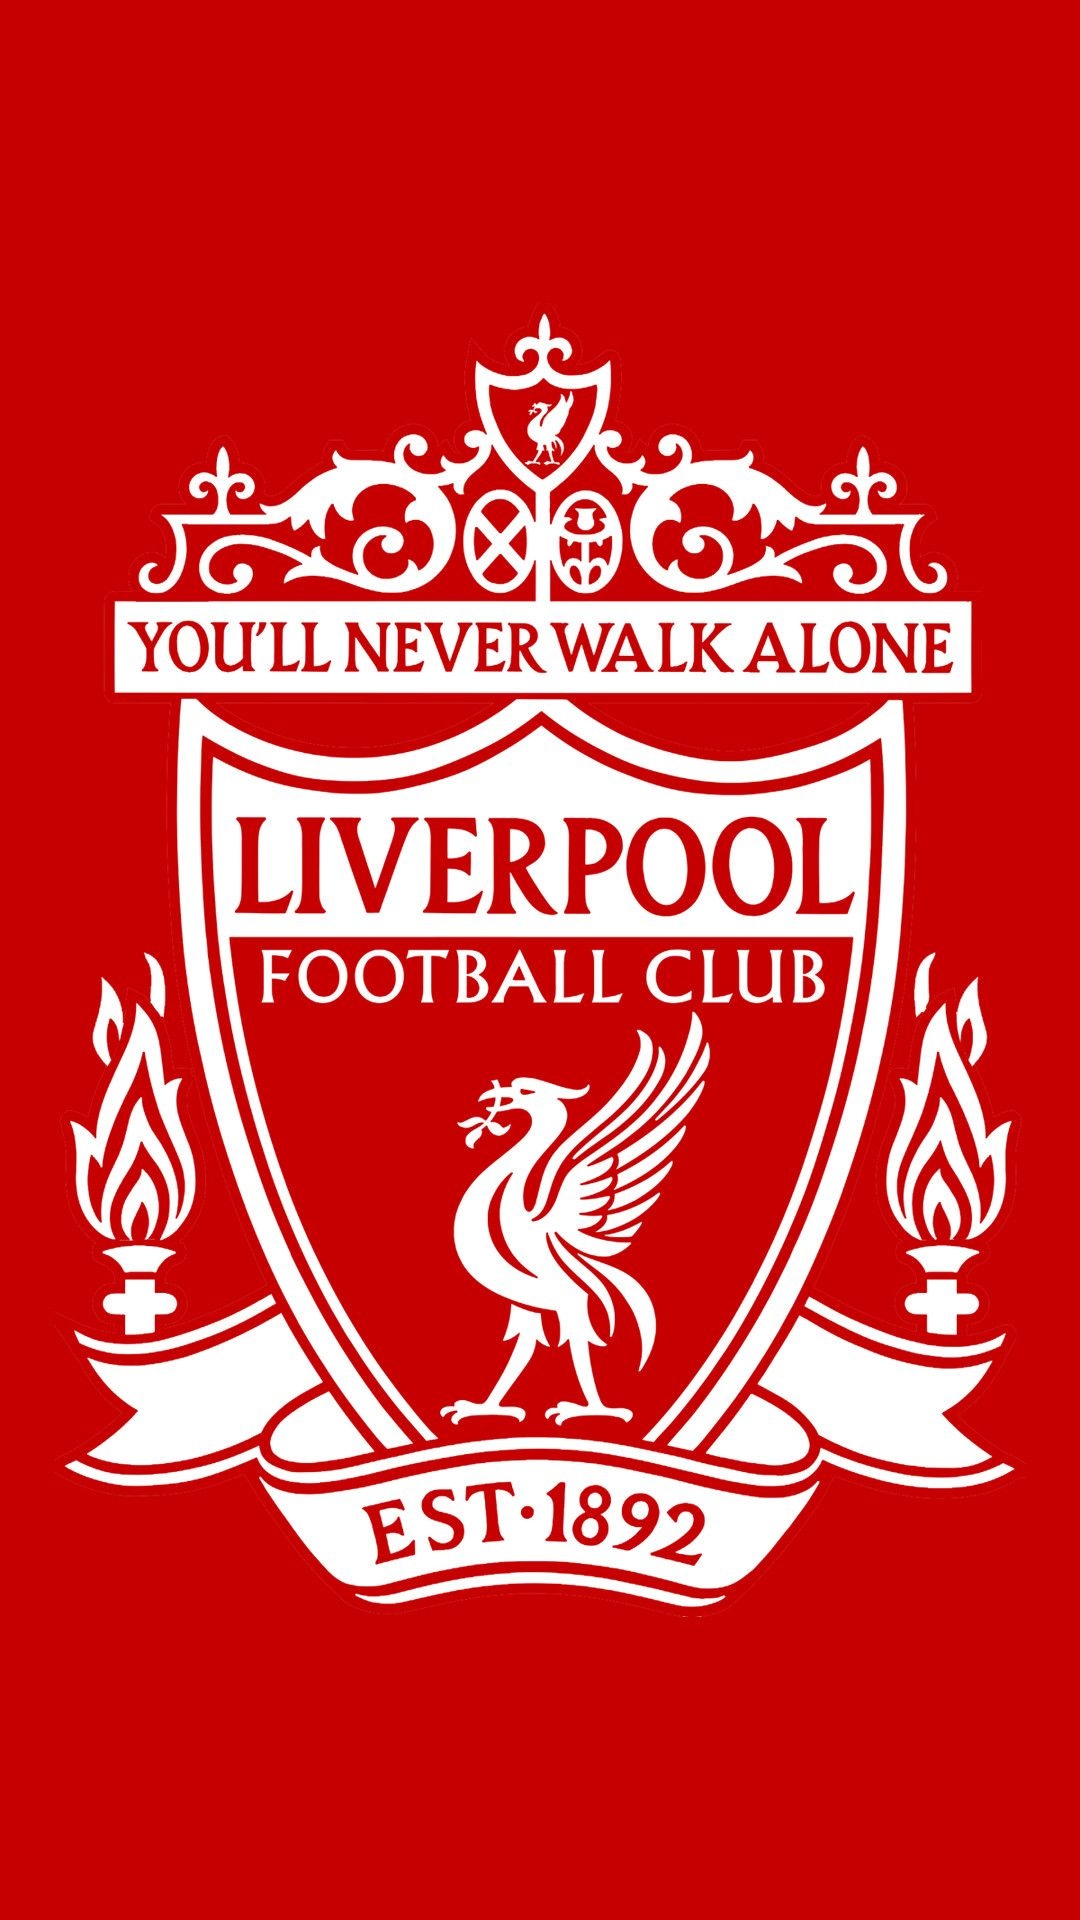 Liverpool Football Club: “You'll Never Walk Alone”, The phrase appearing on the Shankly Gates and on the club's crest. 1080x1920 Full HD Wallpaper.